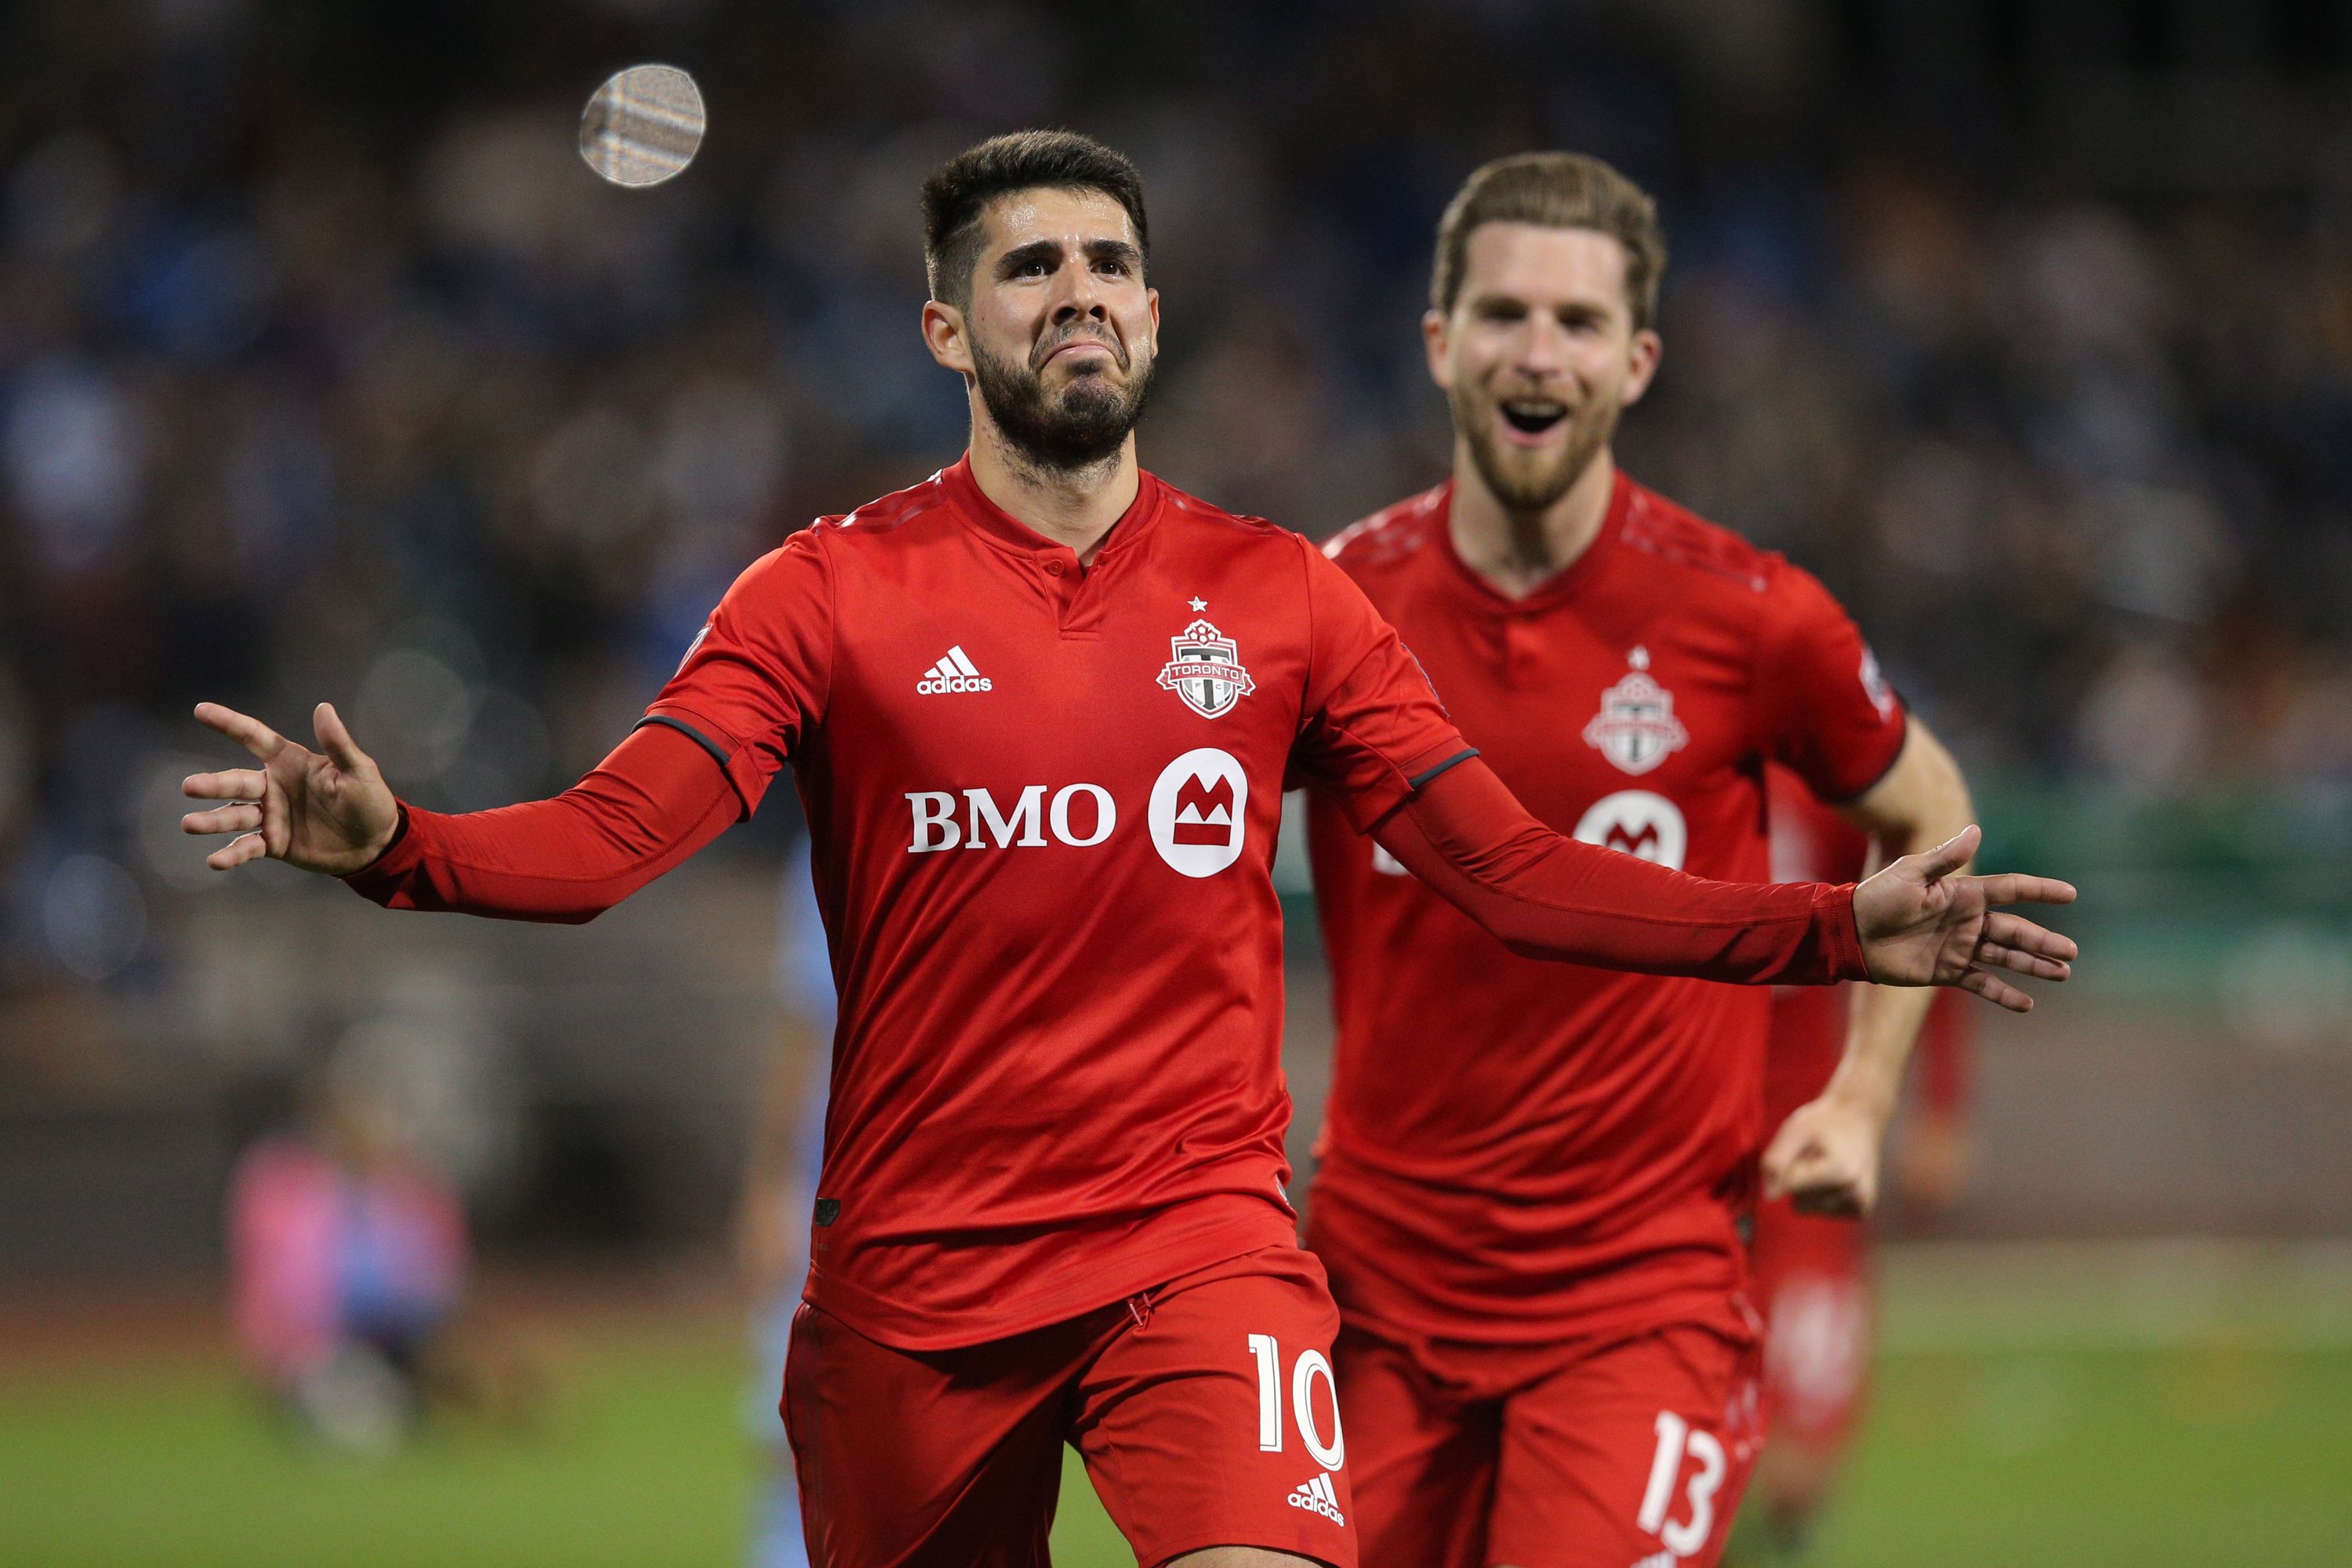 TFC must defeat reigning champs to reach MLS Cup